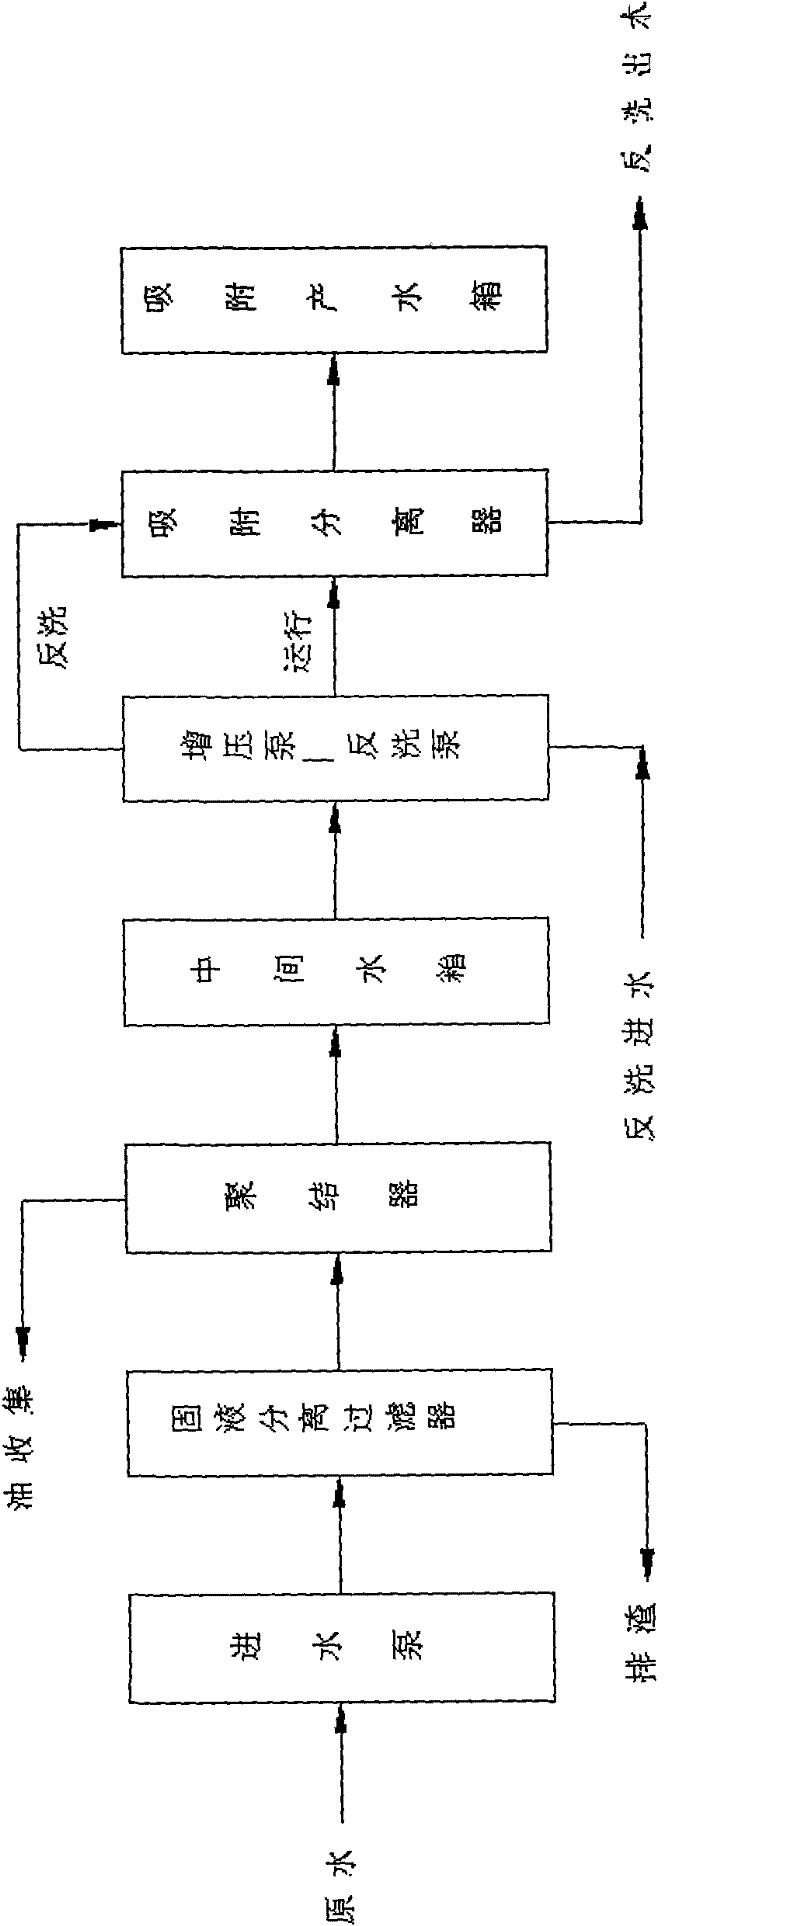 Process for treating oil-containing waste water for ship